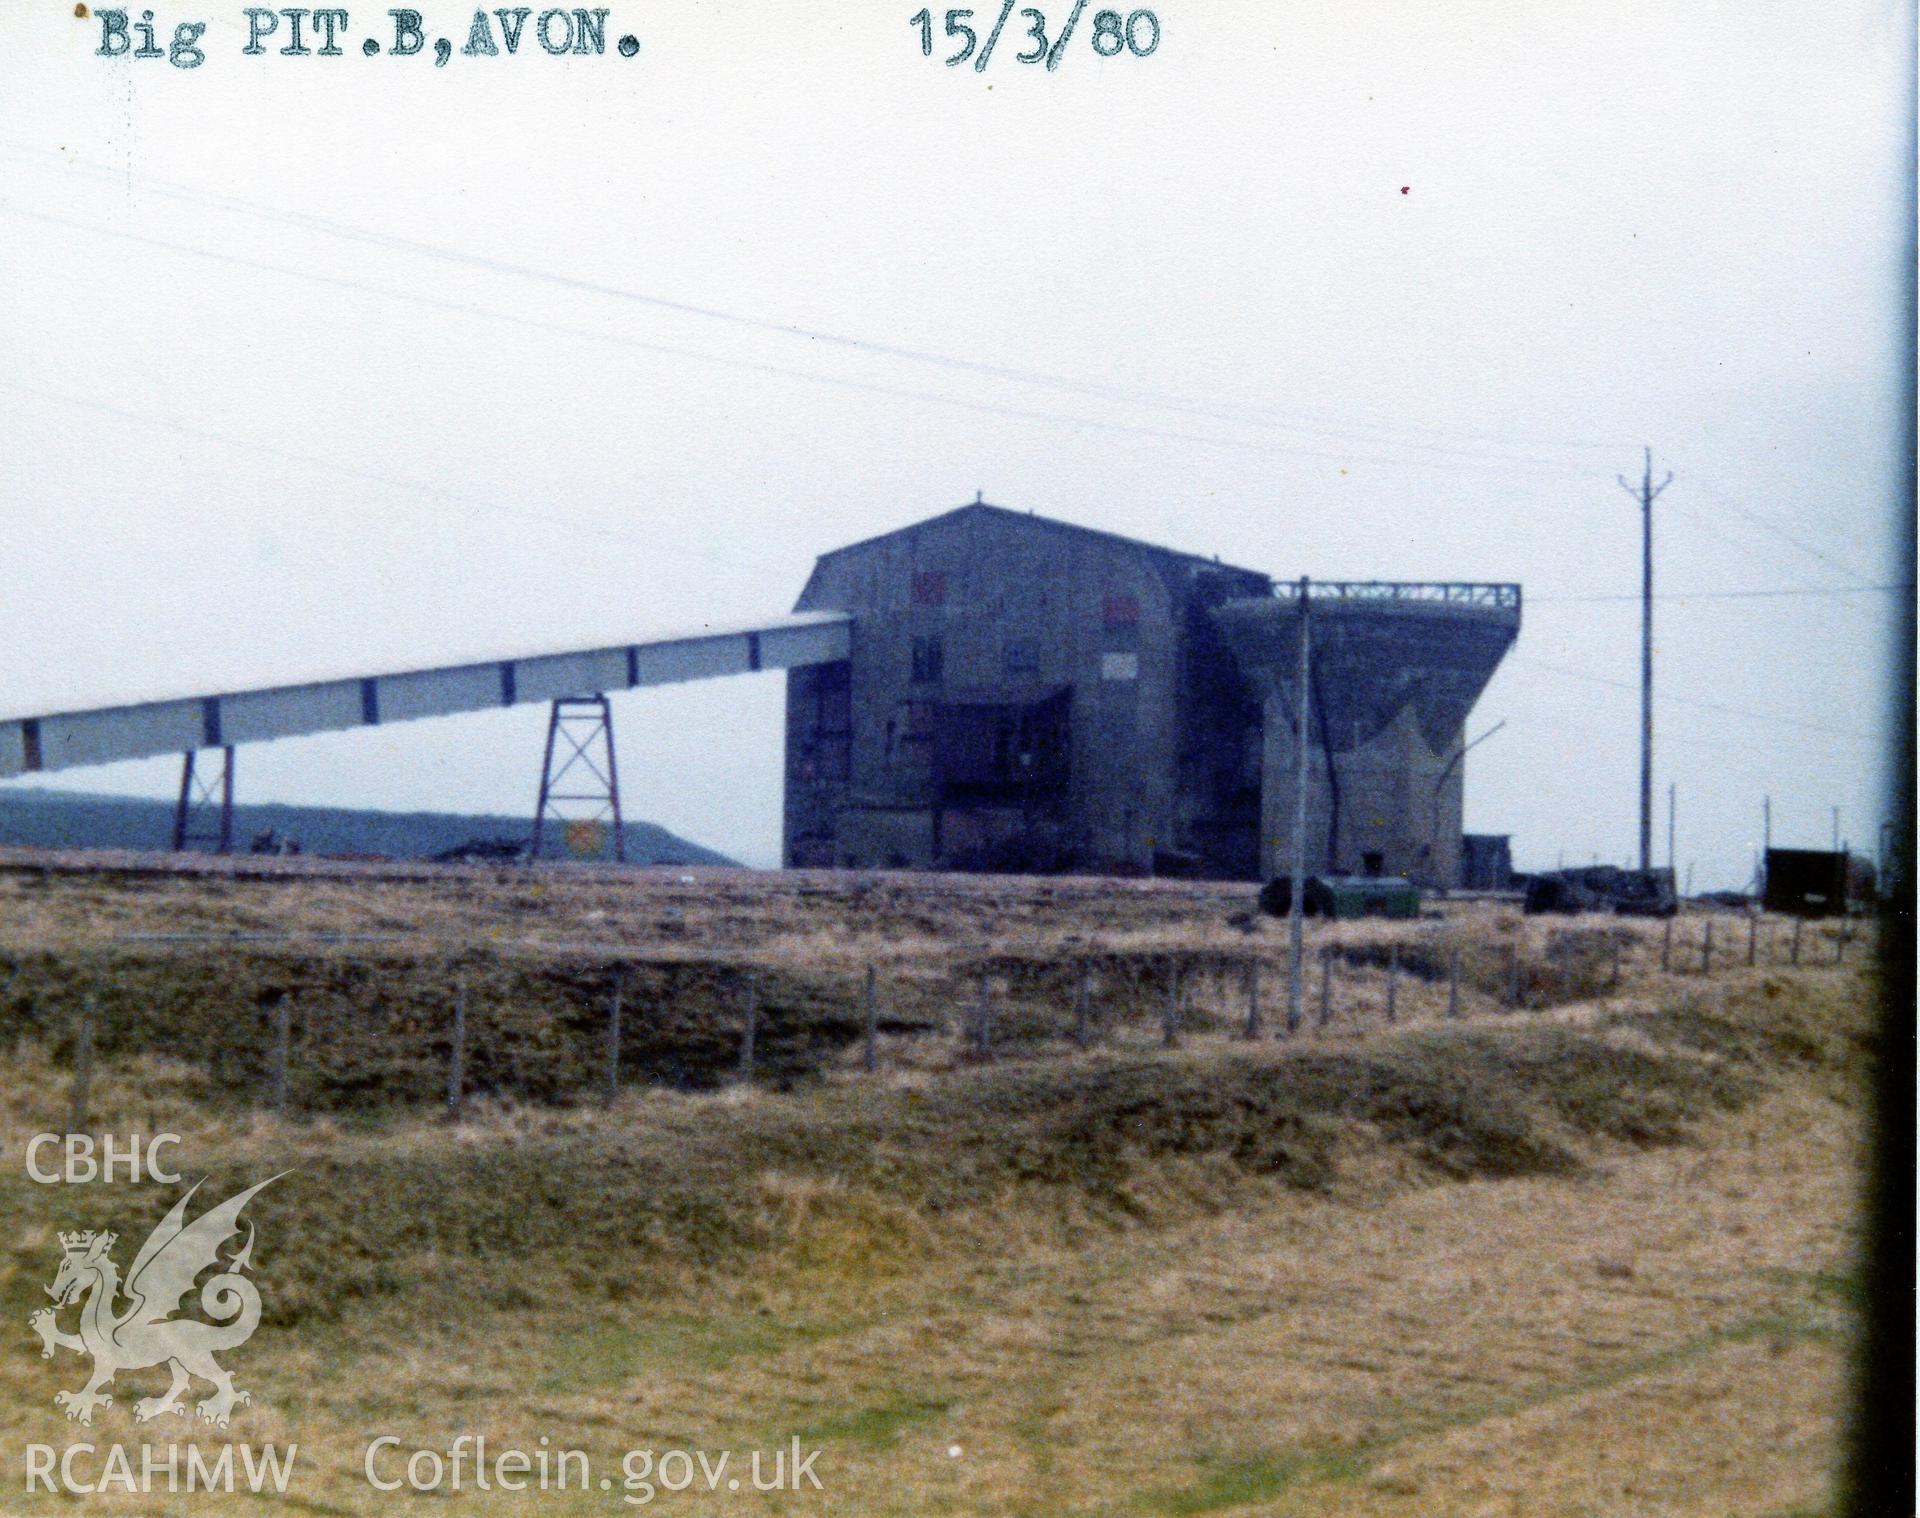 Digital photograph showing Big Pit washery, Blaenavon, dated March 1980.